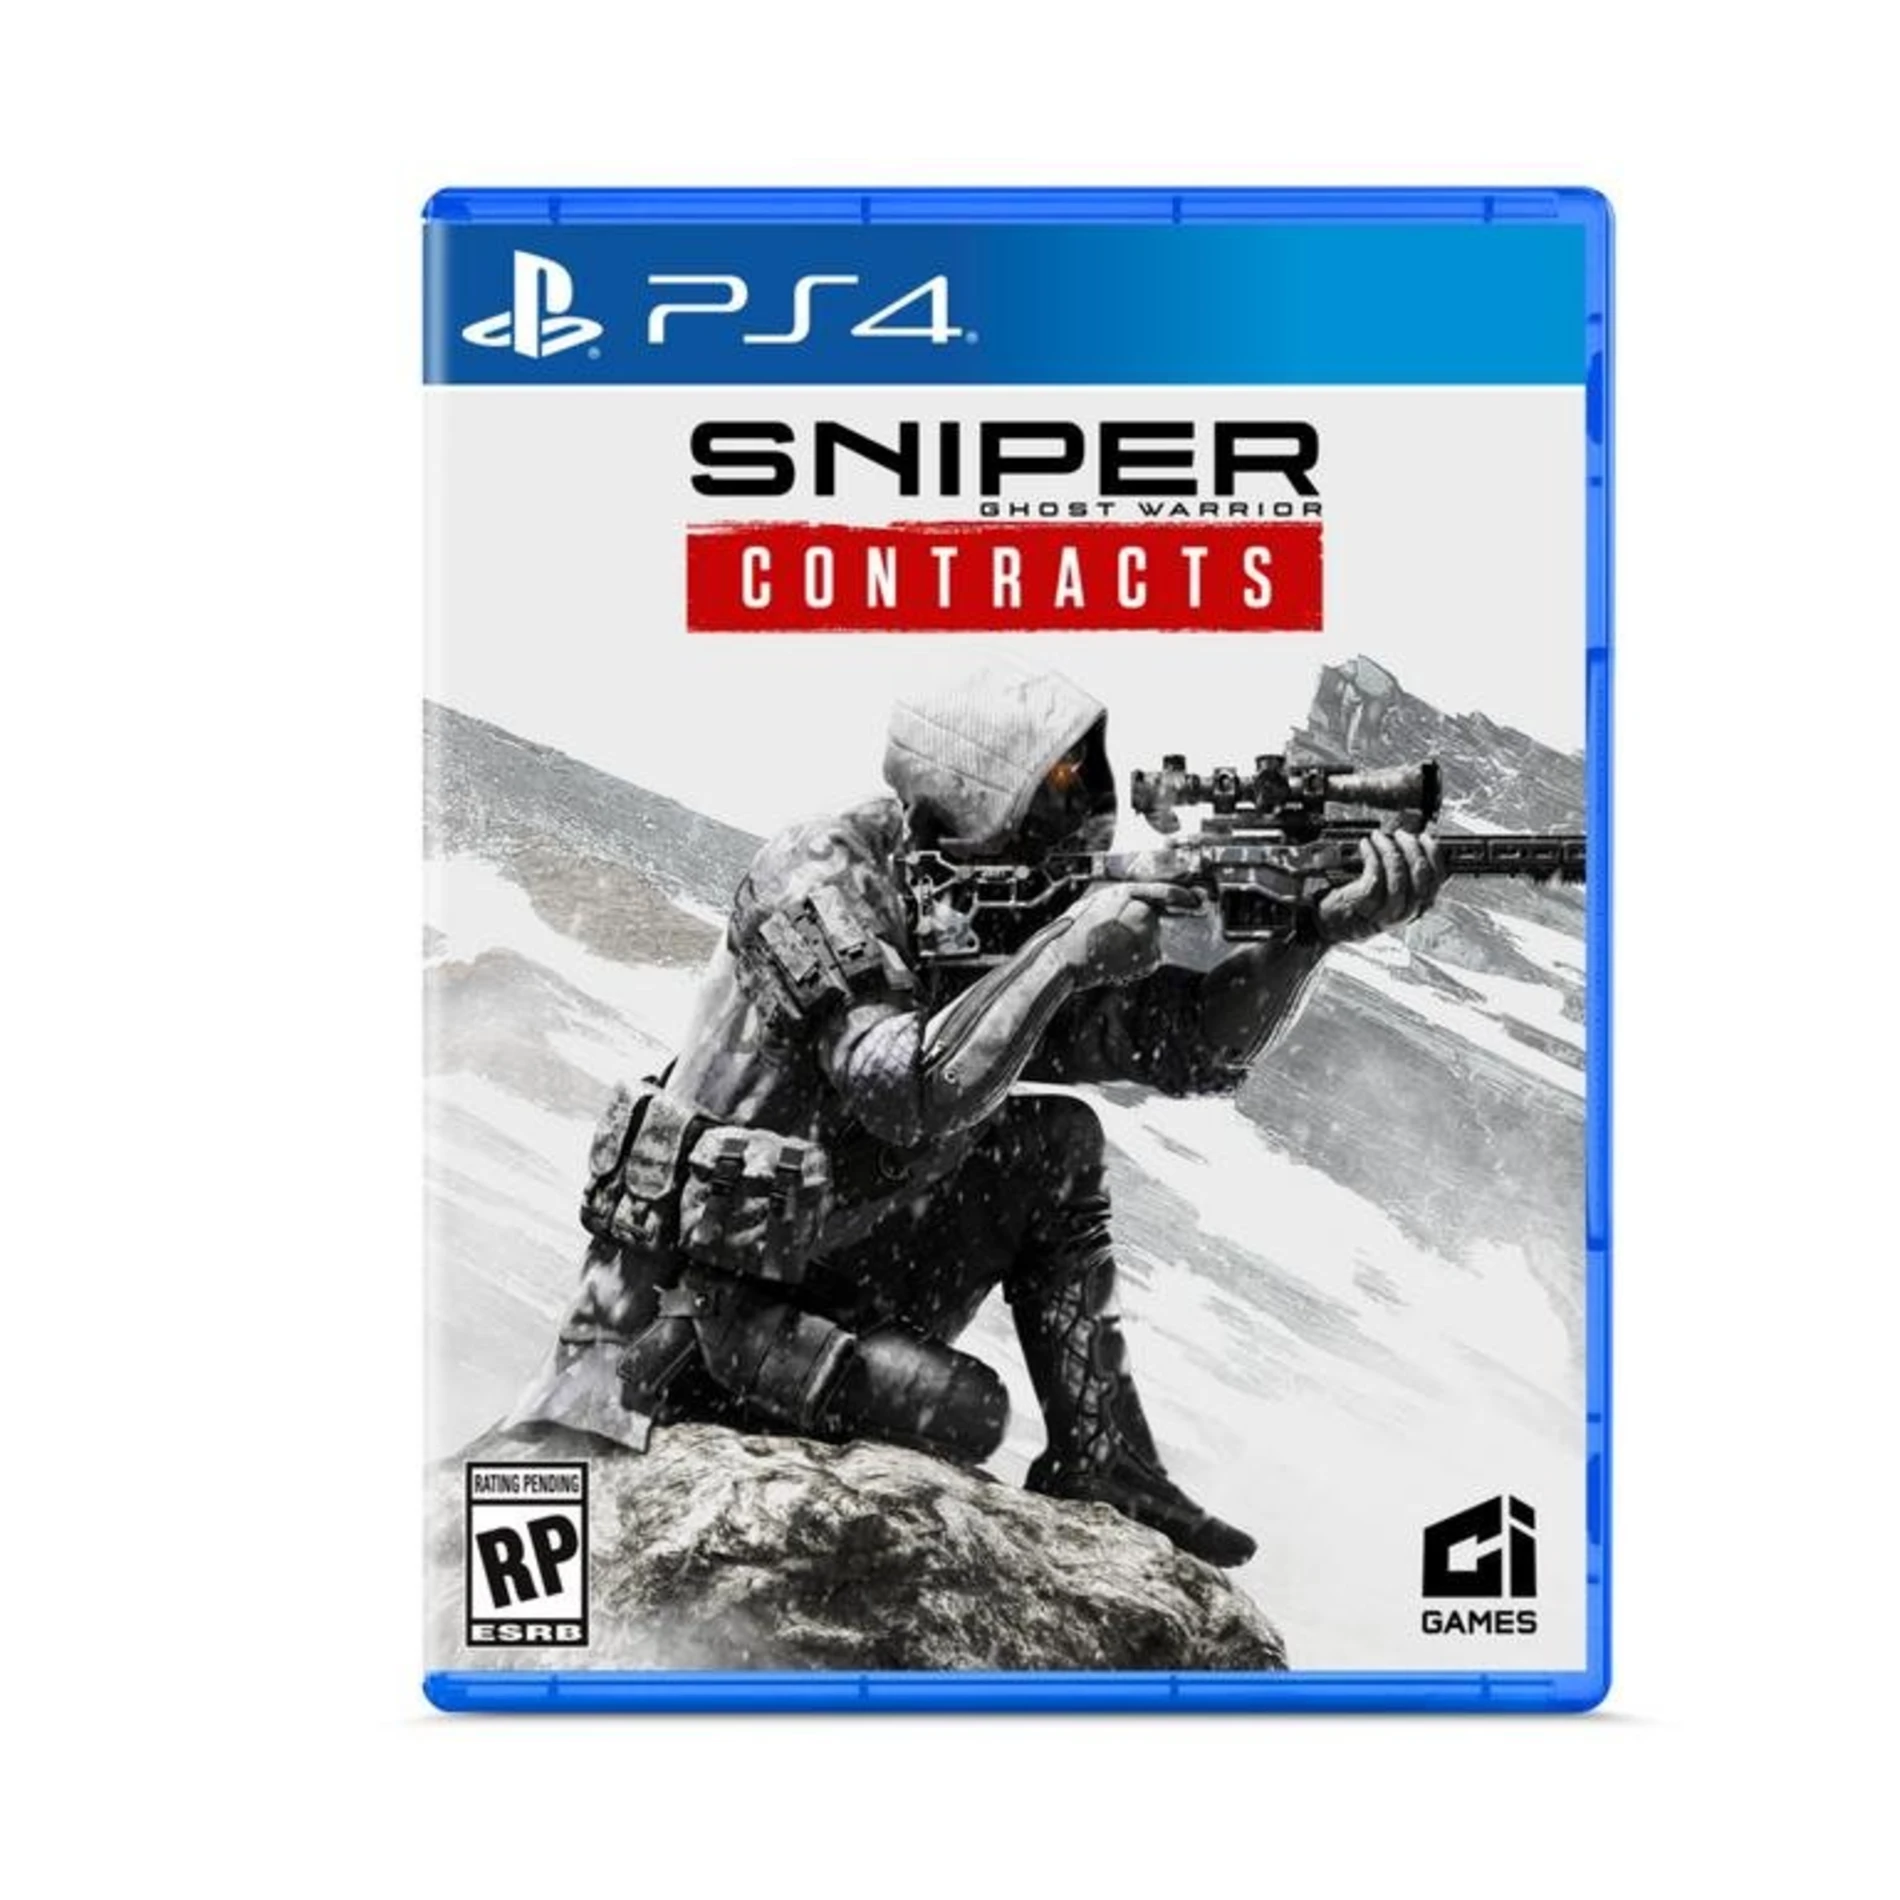 Sniper Ghost Warrior Contracts - Ps4 Oyun [SIFIR]